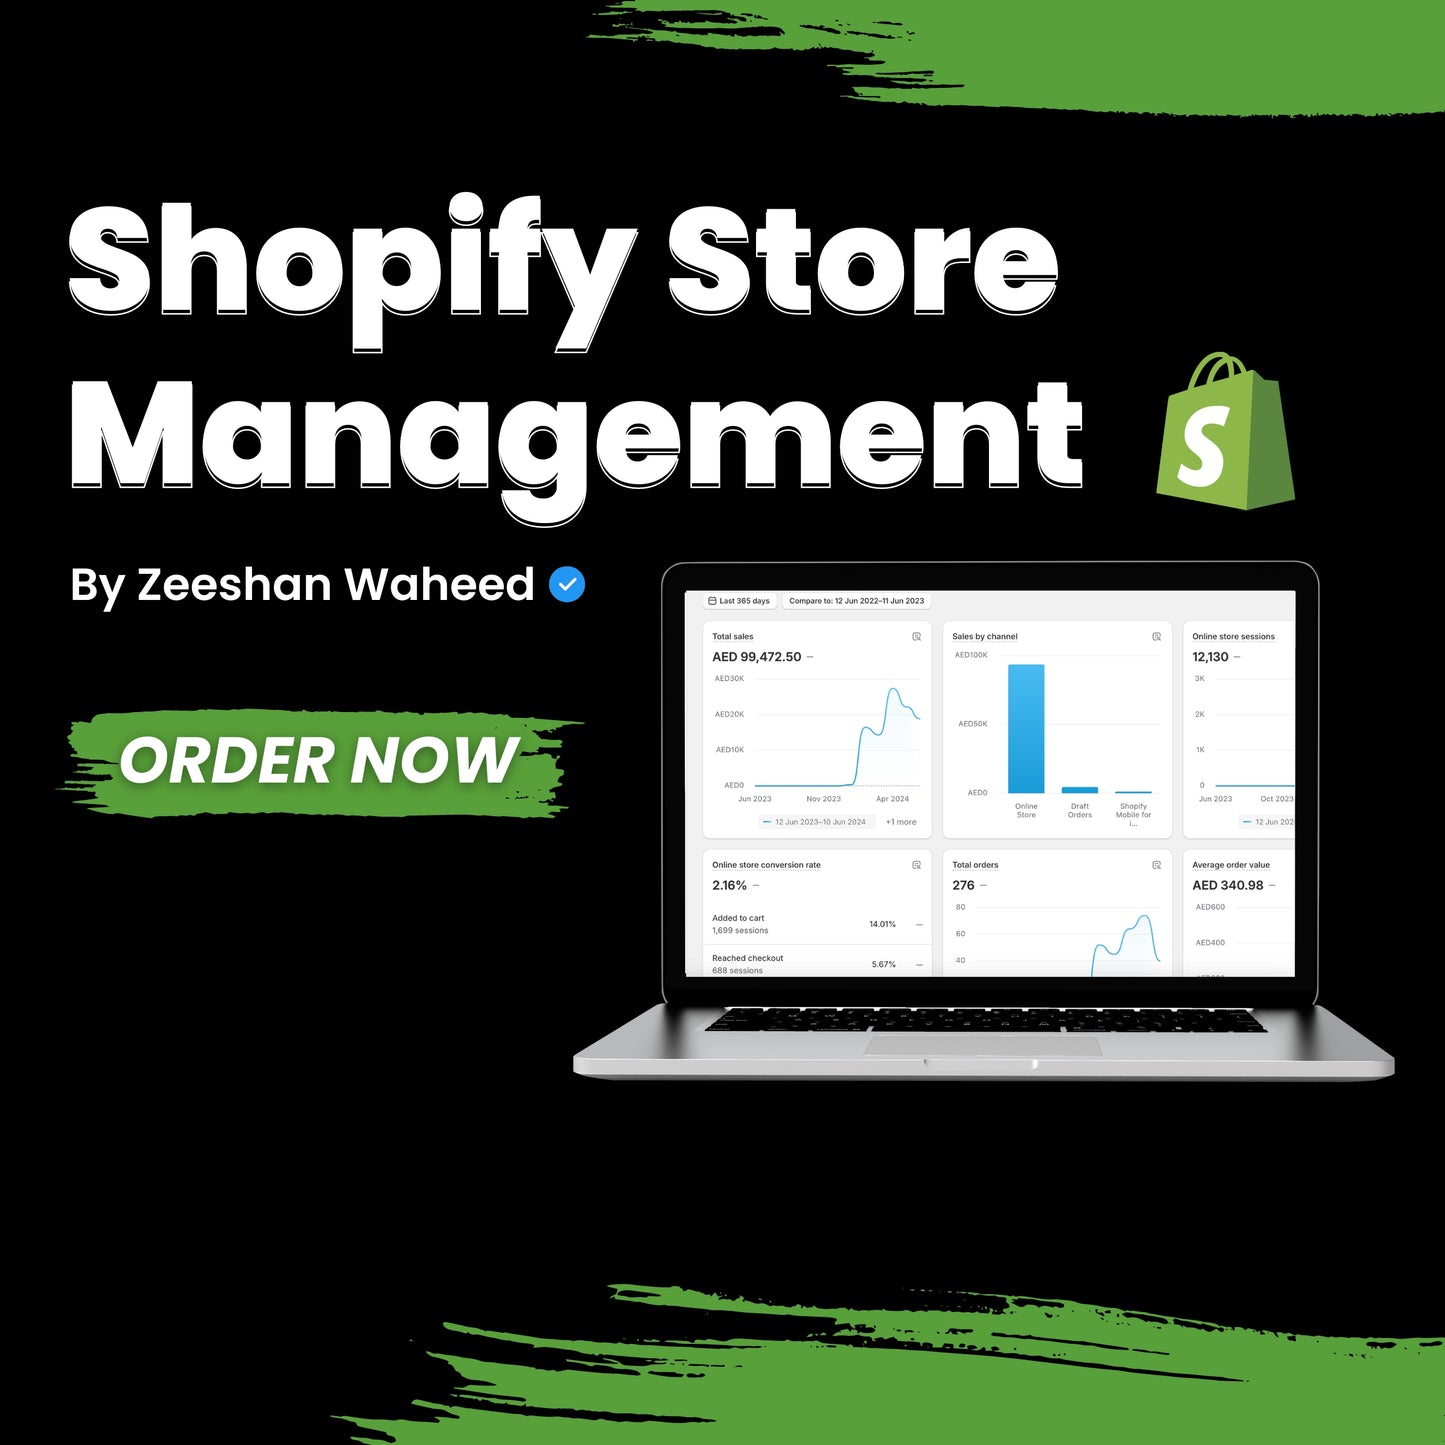 Shopify Store Management (Month)